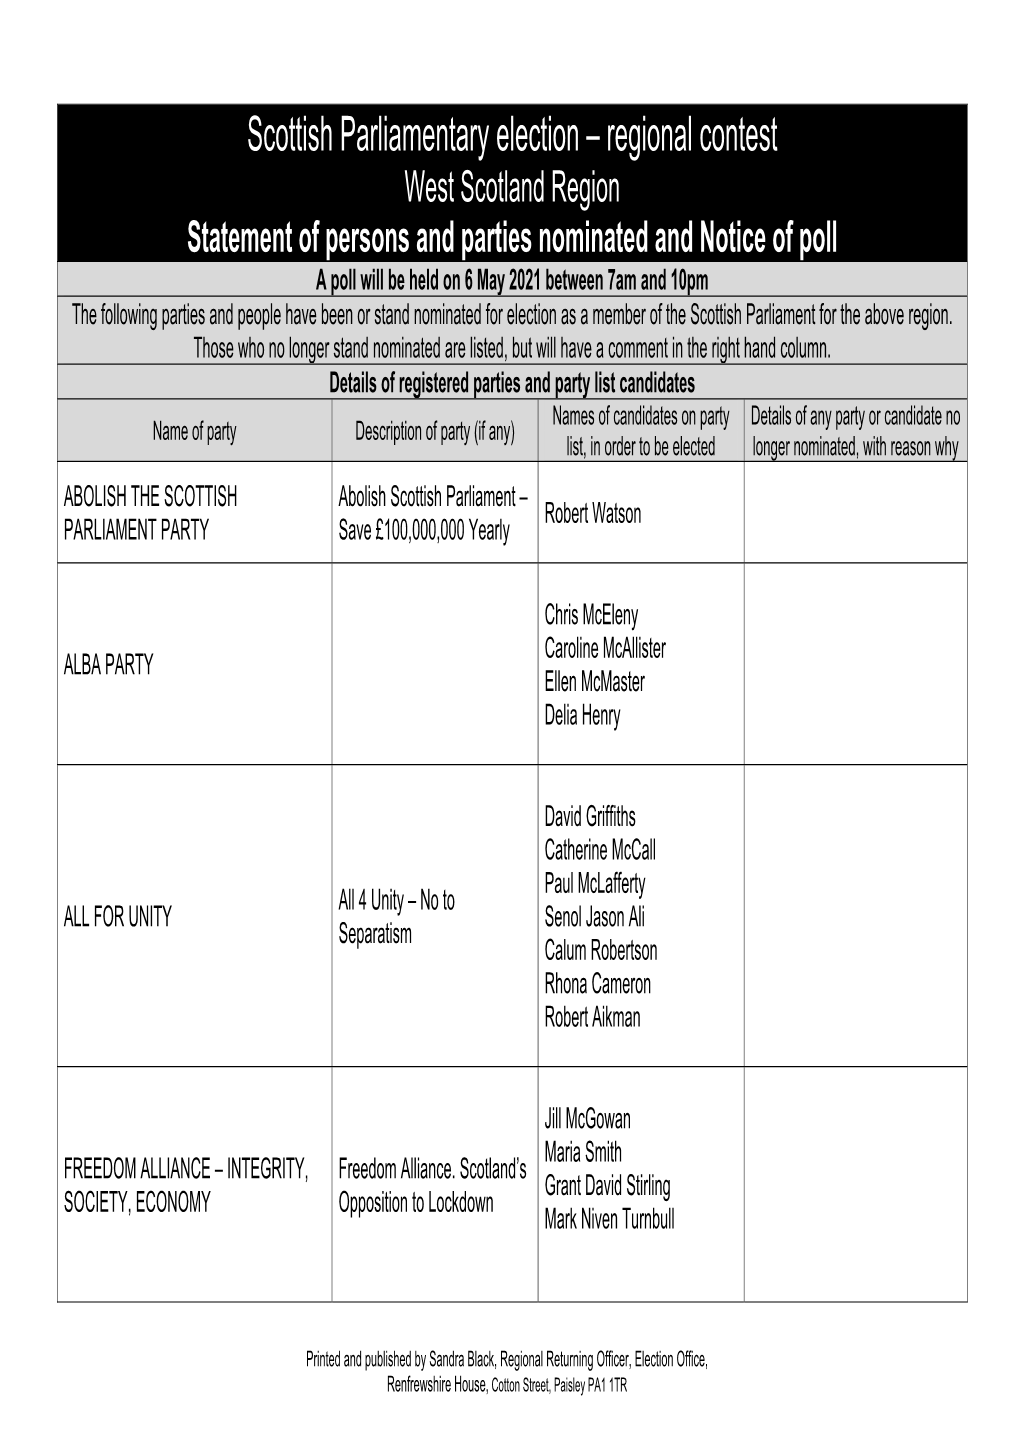 West Scotland Region Notice of Poll and Situation of Polling Stations